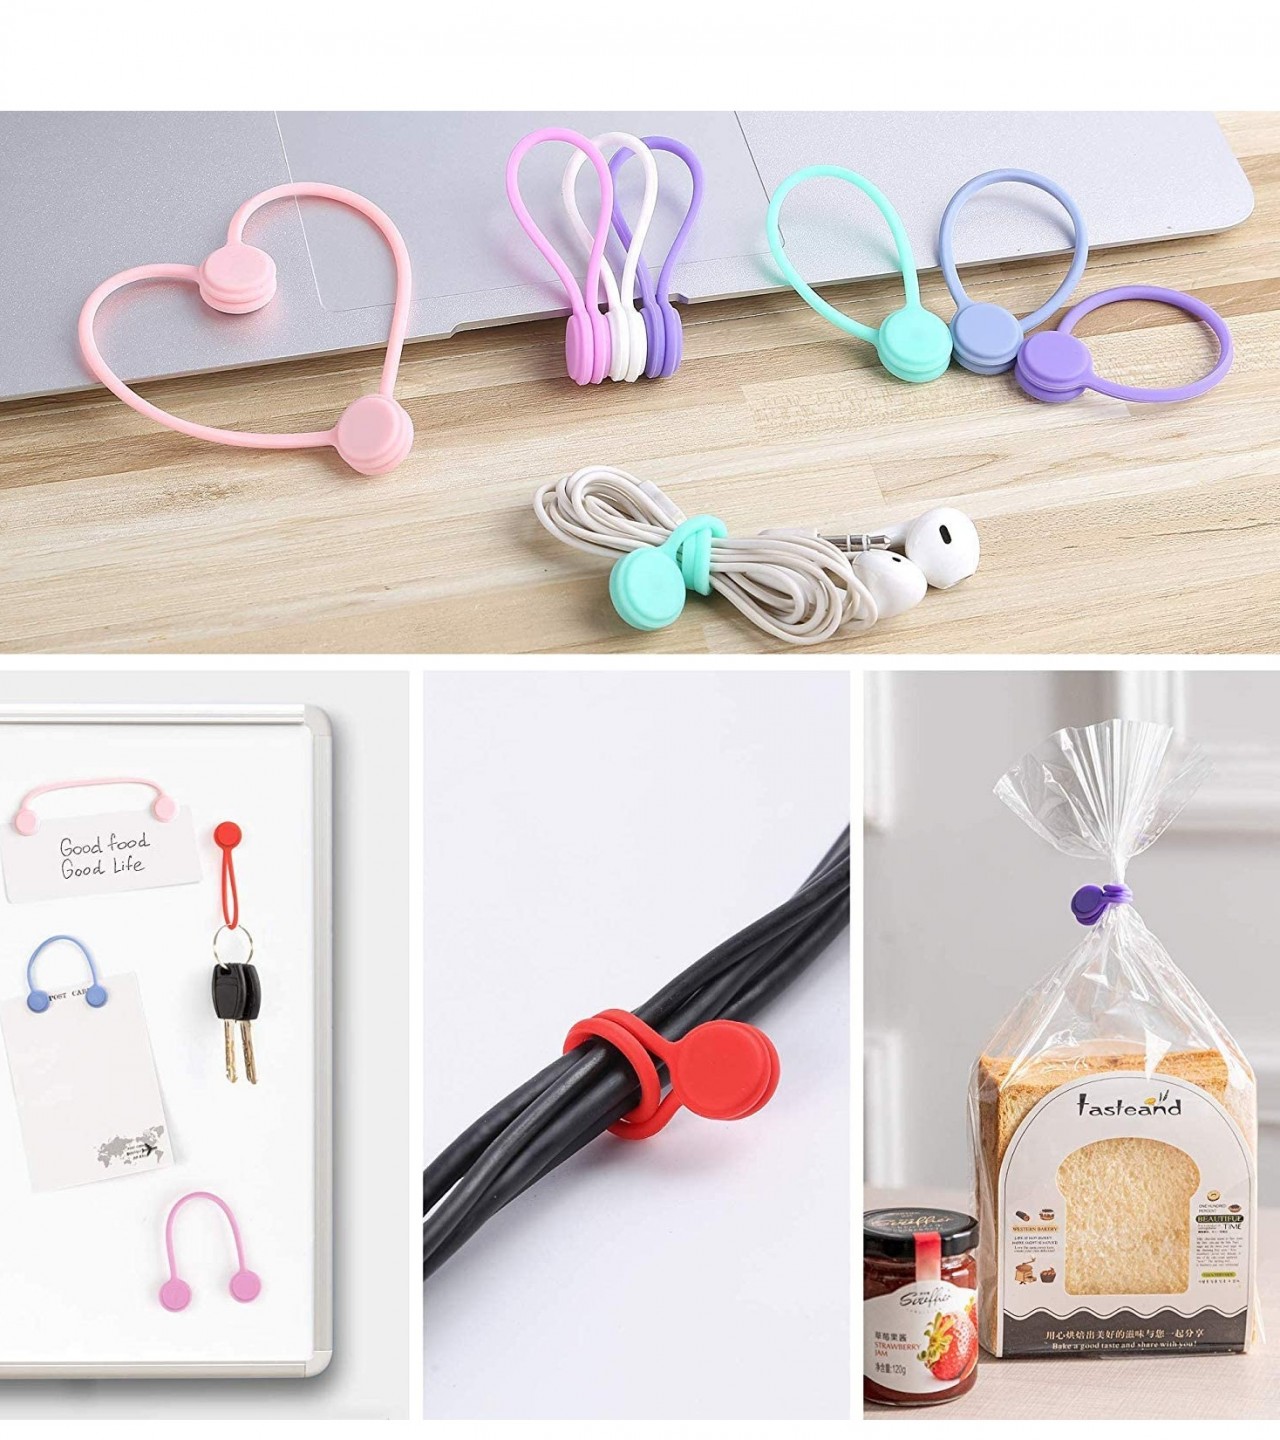 4Pcs Multi-Purpose Super Strong Magnetic Twist Ties Cable Winder Desktop Cable Organizer Holder